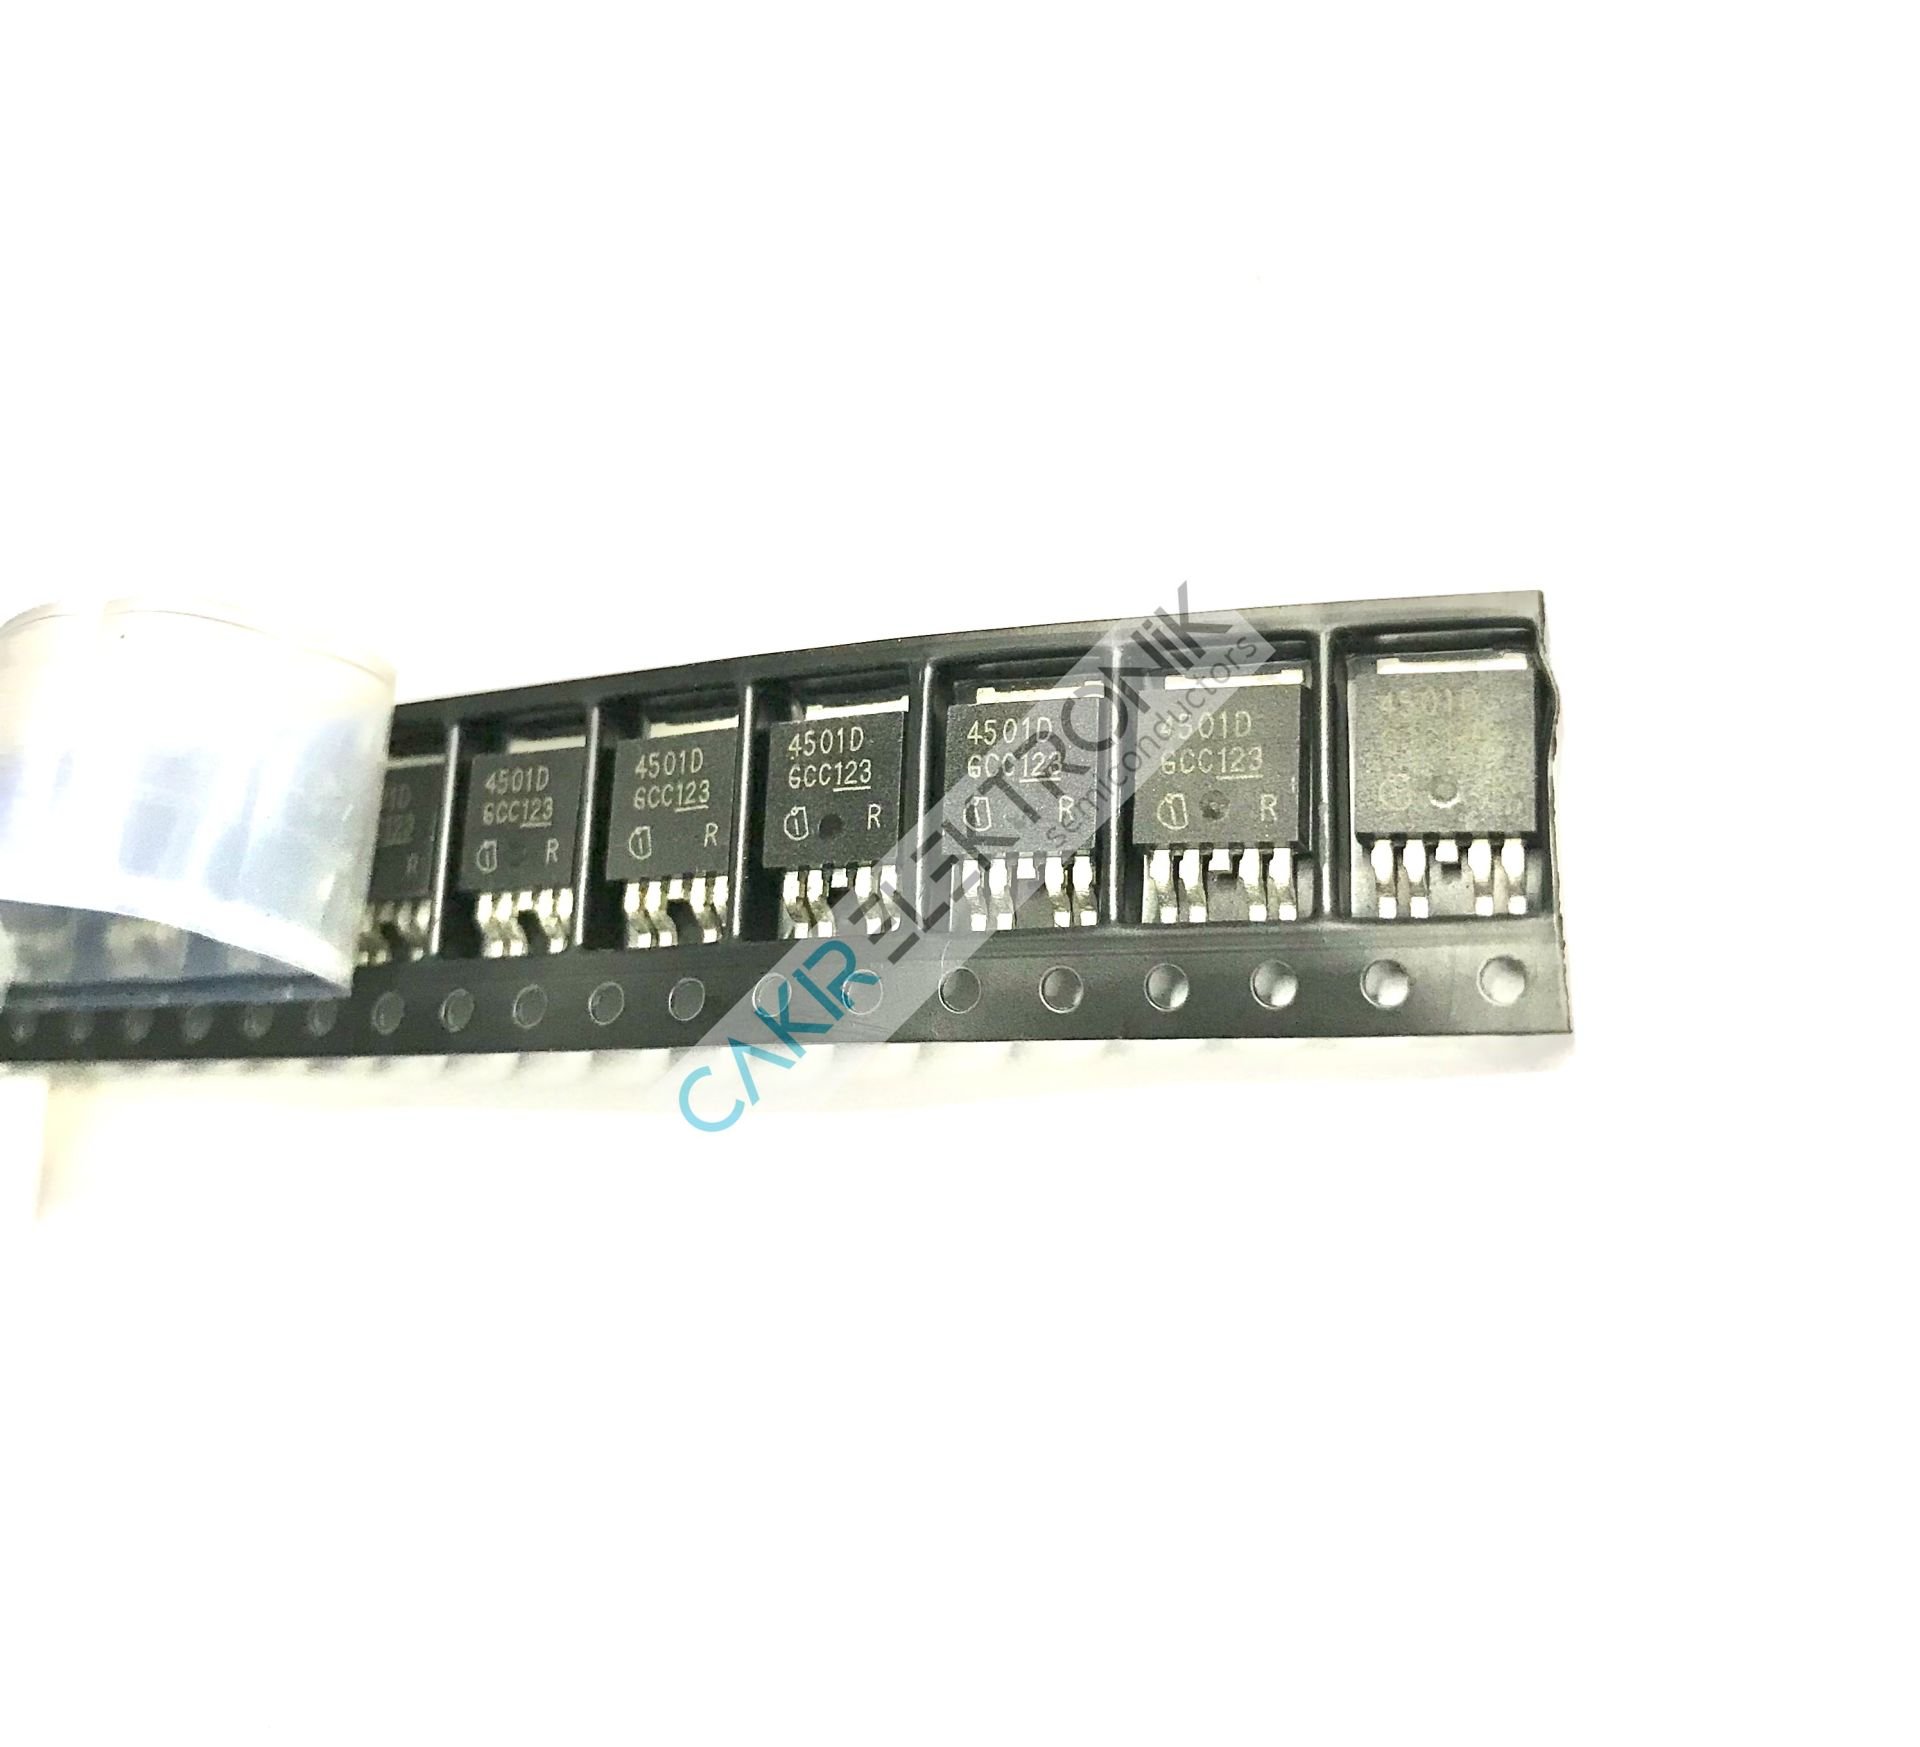 BTS4501D - BTS4501 - 4501 -BTS 4501D Smart Power High-Side- Switch One Channel: 1 x 200mΩ Features